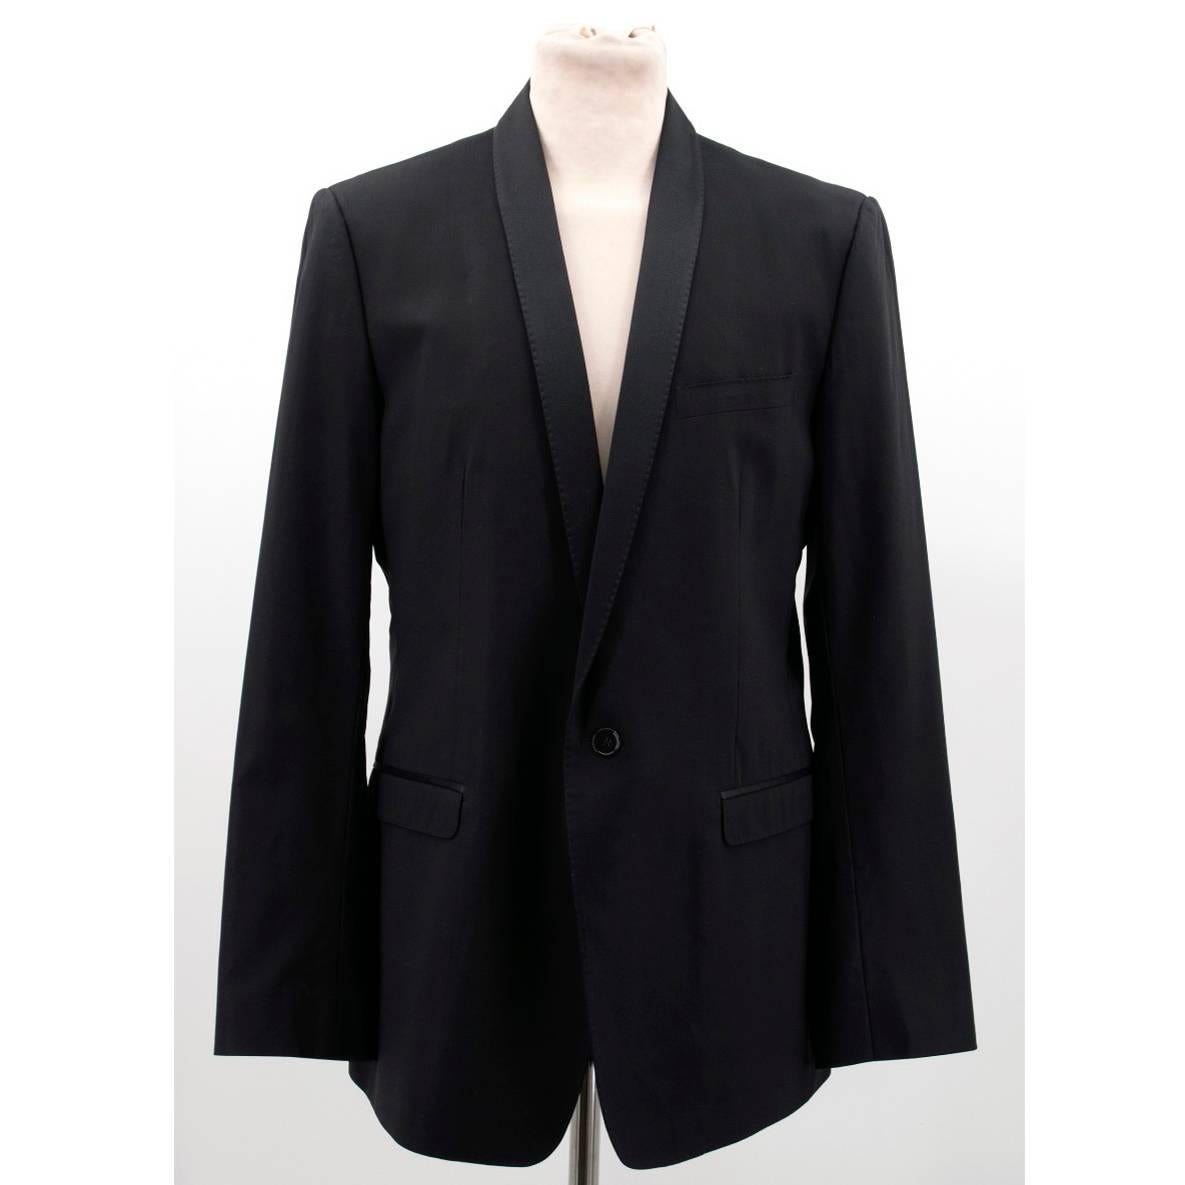 Dolce & Gabbana black tuxedo jacket in a wool-silk blend featuring a contrasting lapel with a shine-finish and a single button fastening. 

Size: XL
Measurements: Approx. Length - 81cm Chest - 56cm Sleeve - 48cm
Condition: 10/10

* Please note,